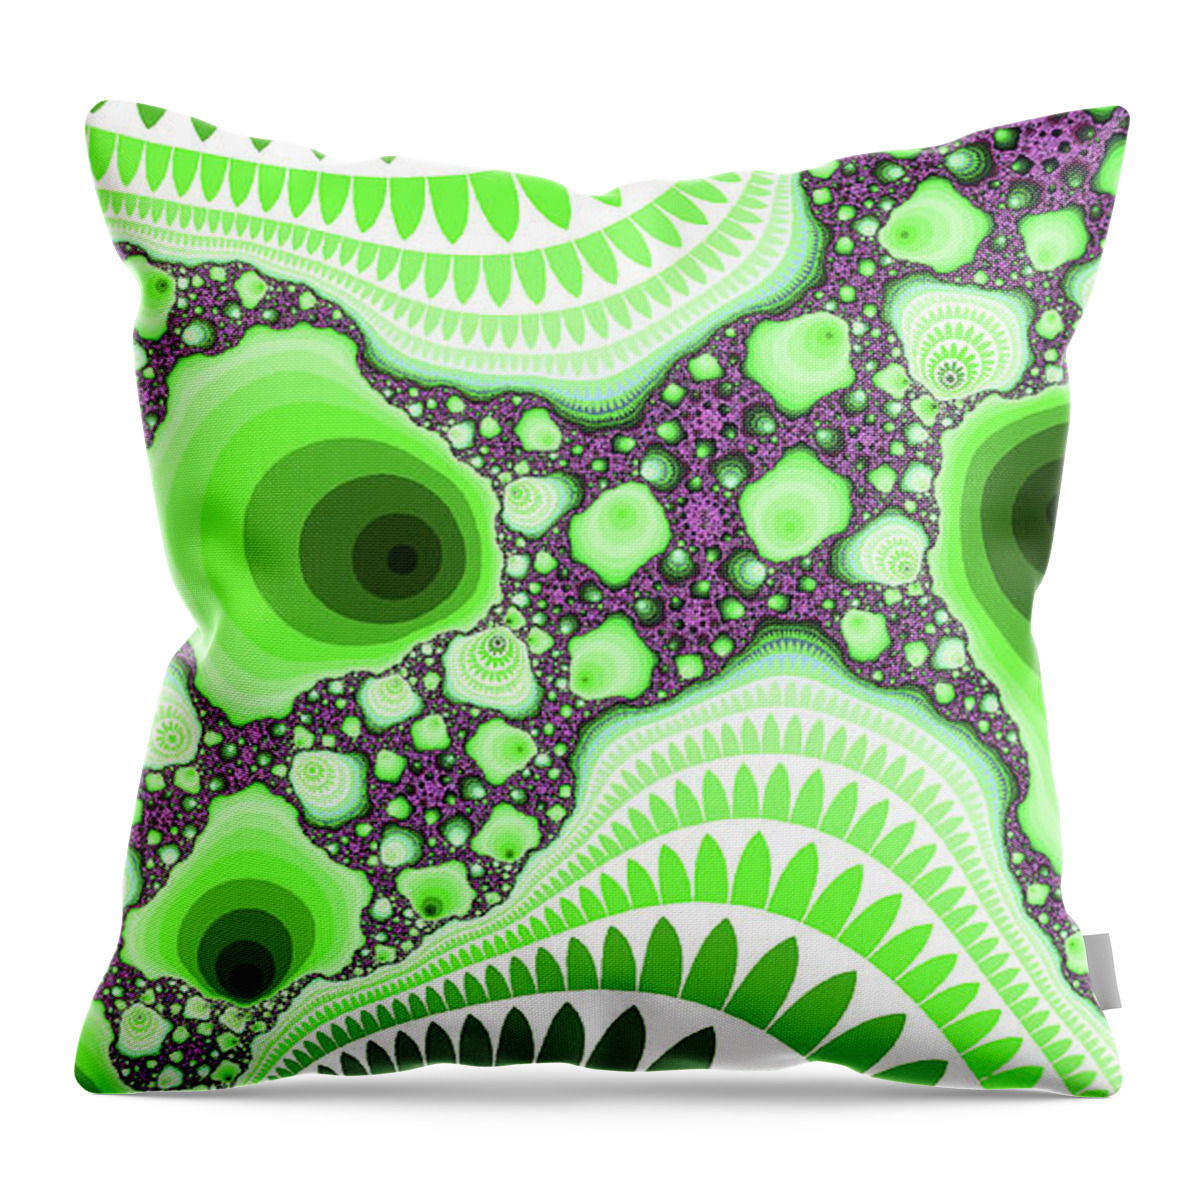 Abstract Throw Pillow featuring the digital art Mirror Peaks Green Abstract Art Image by Don Northup